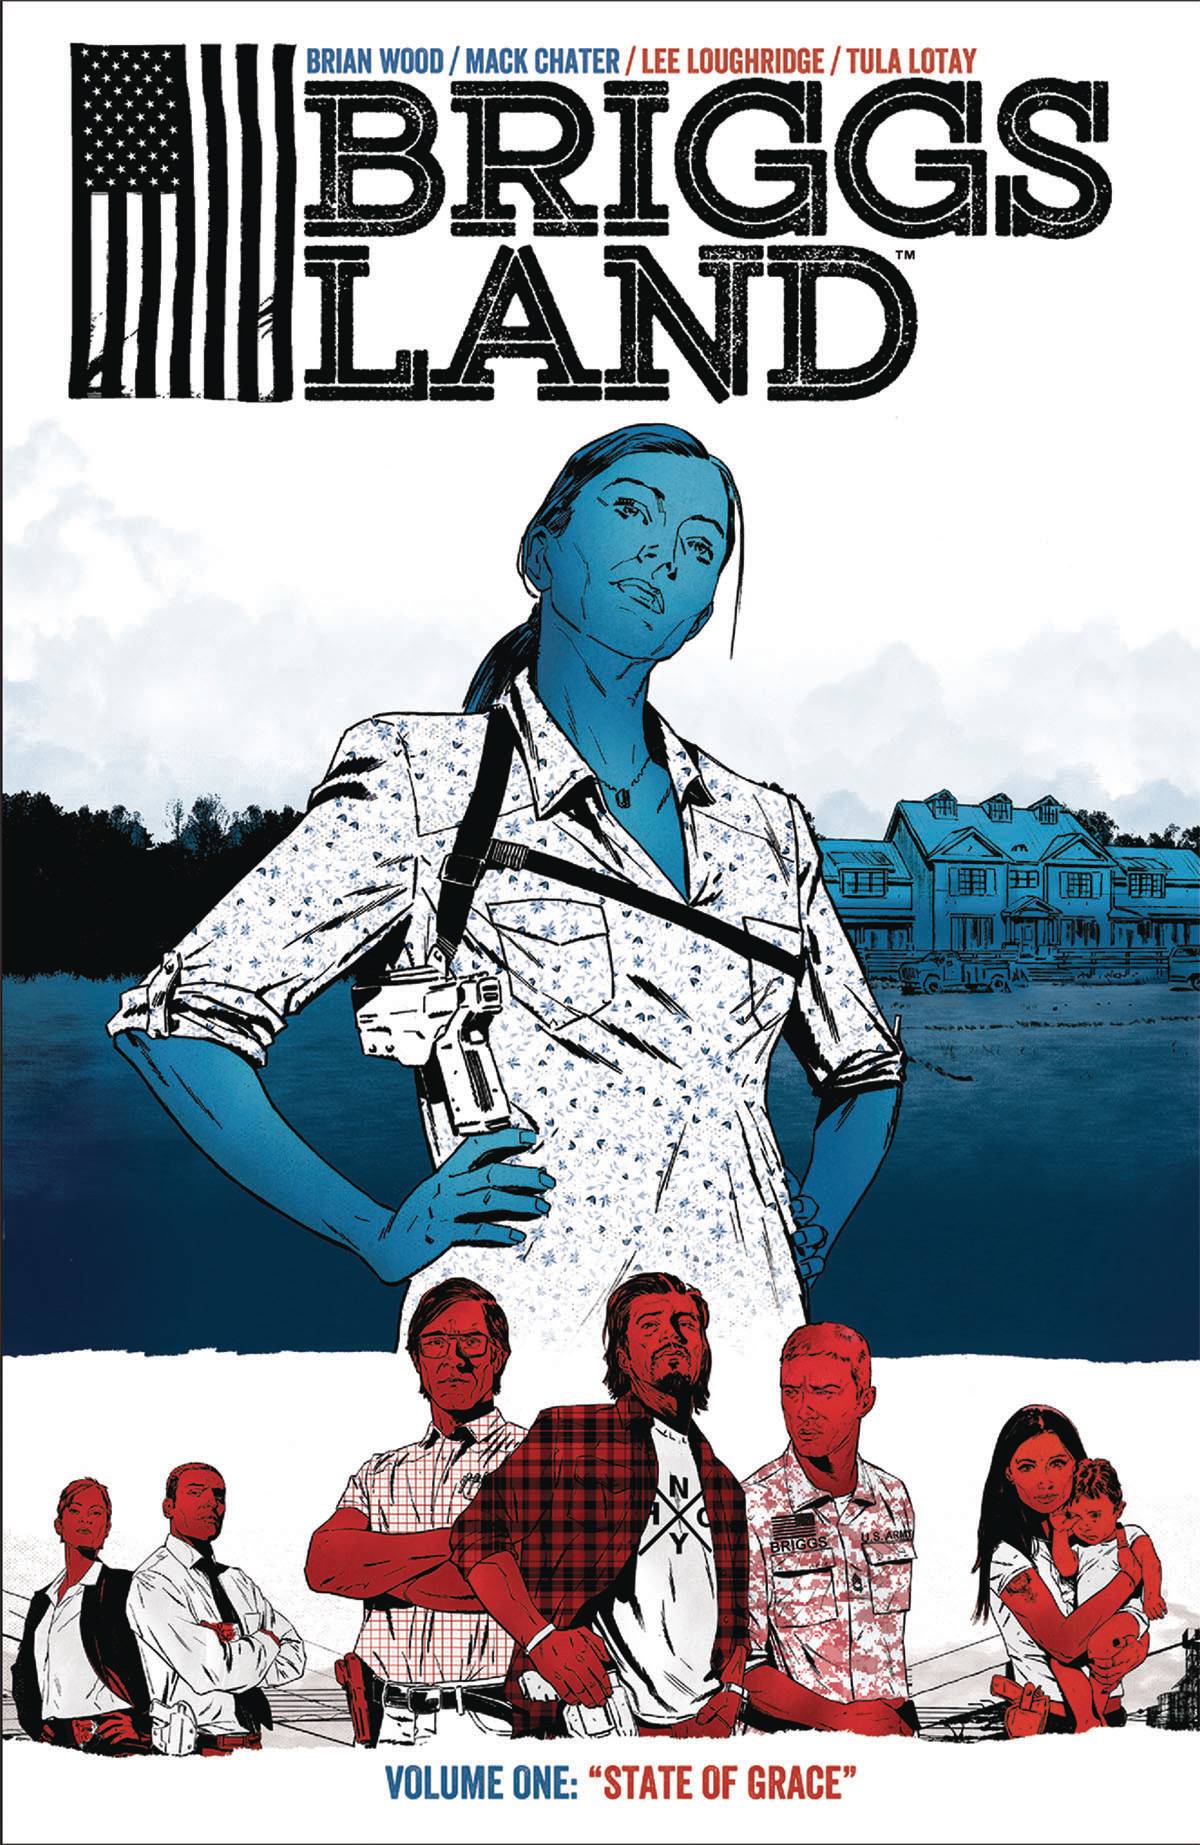 Briggs Land Graphic Novel Volume 1 State of Grace